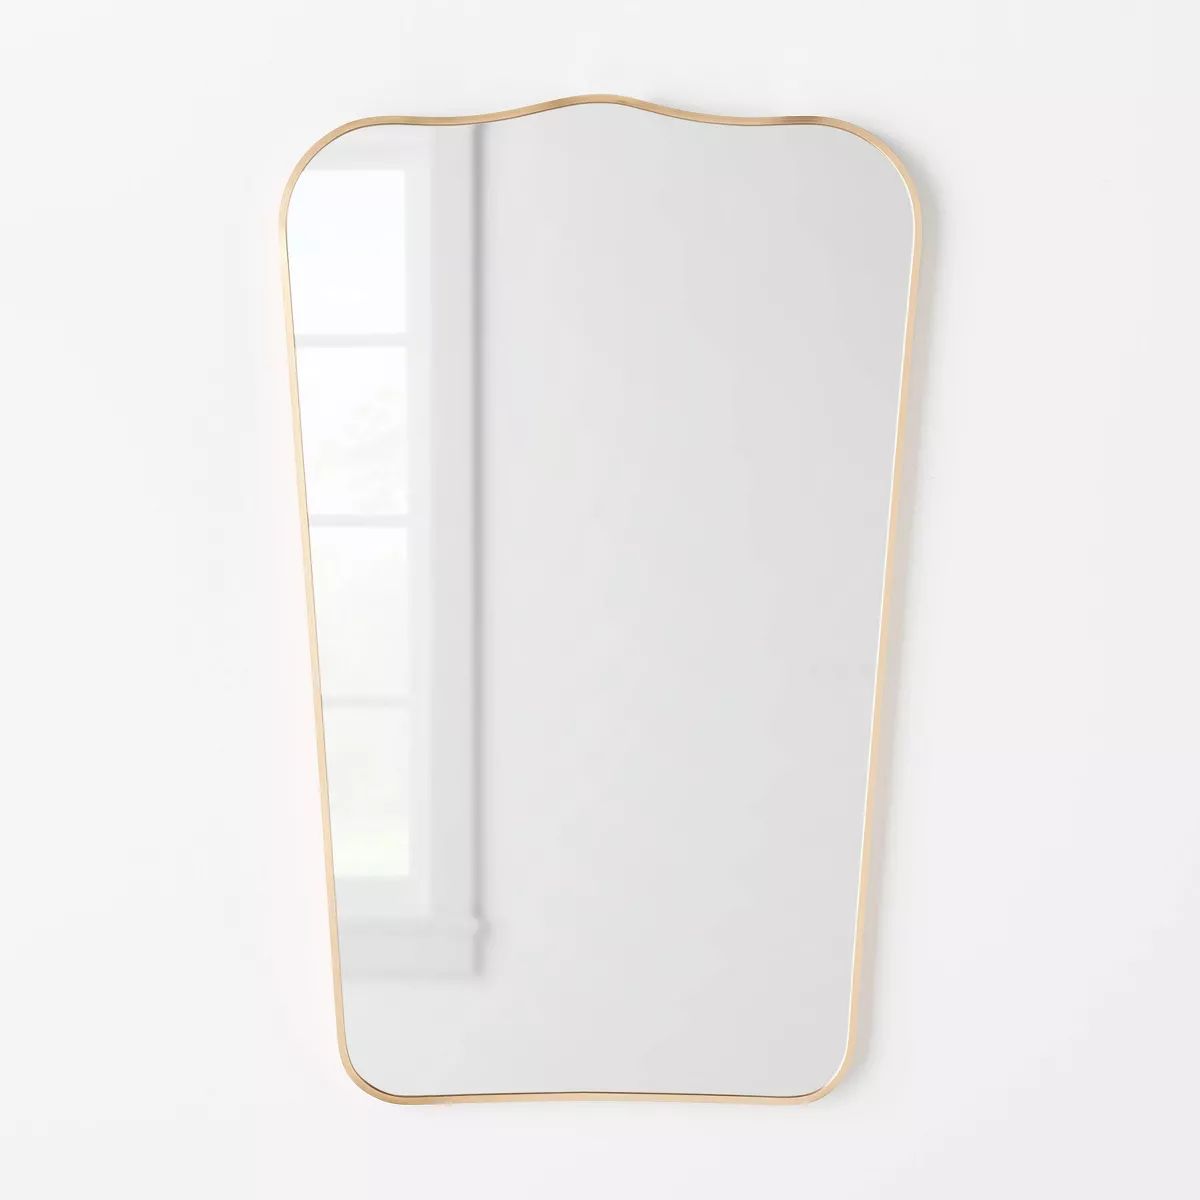 23" x 36" Metal Curved Top Mirror Gold - Threshold™ designed with Studio McGee | Target